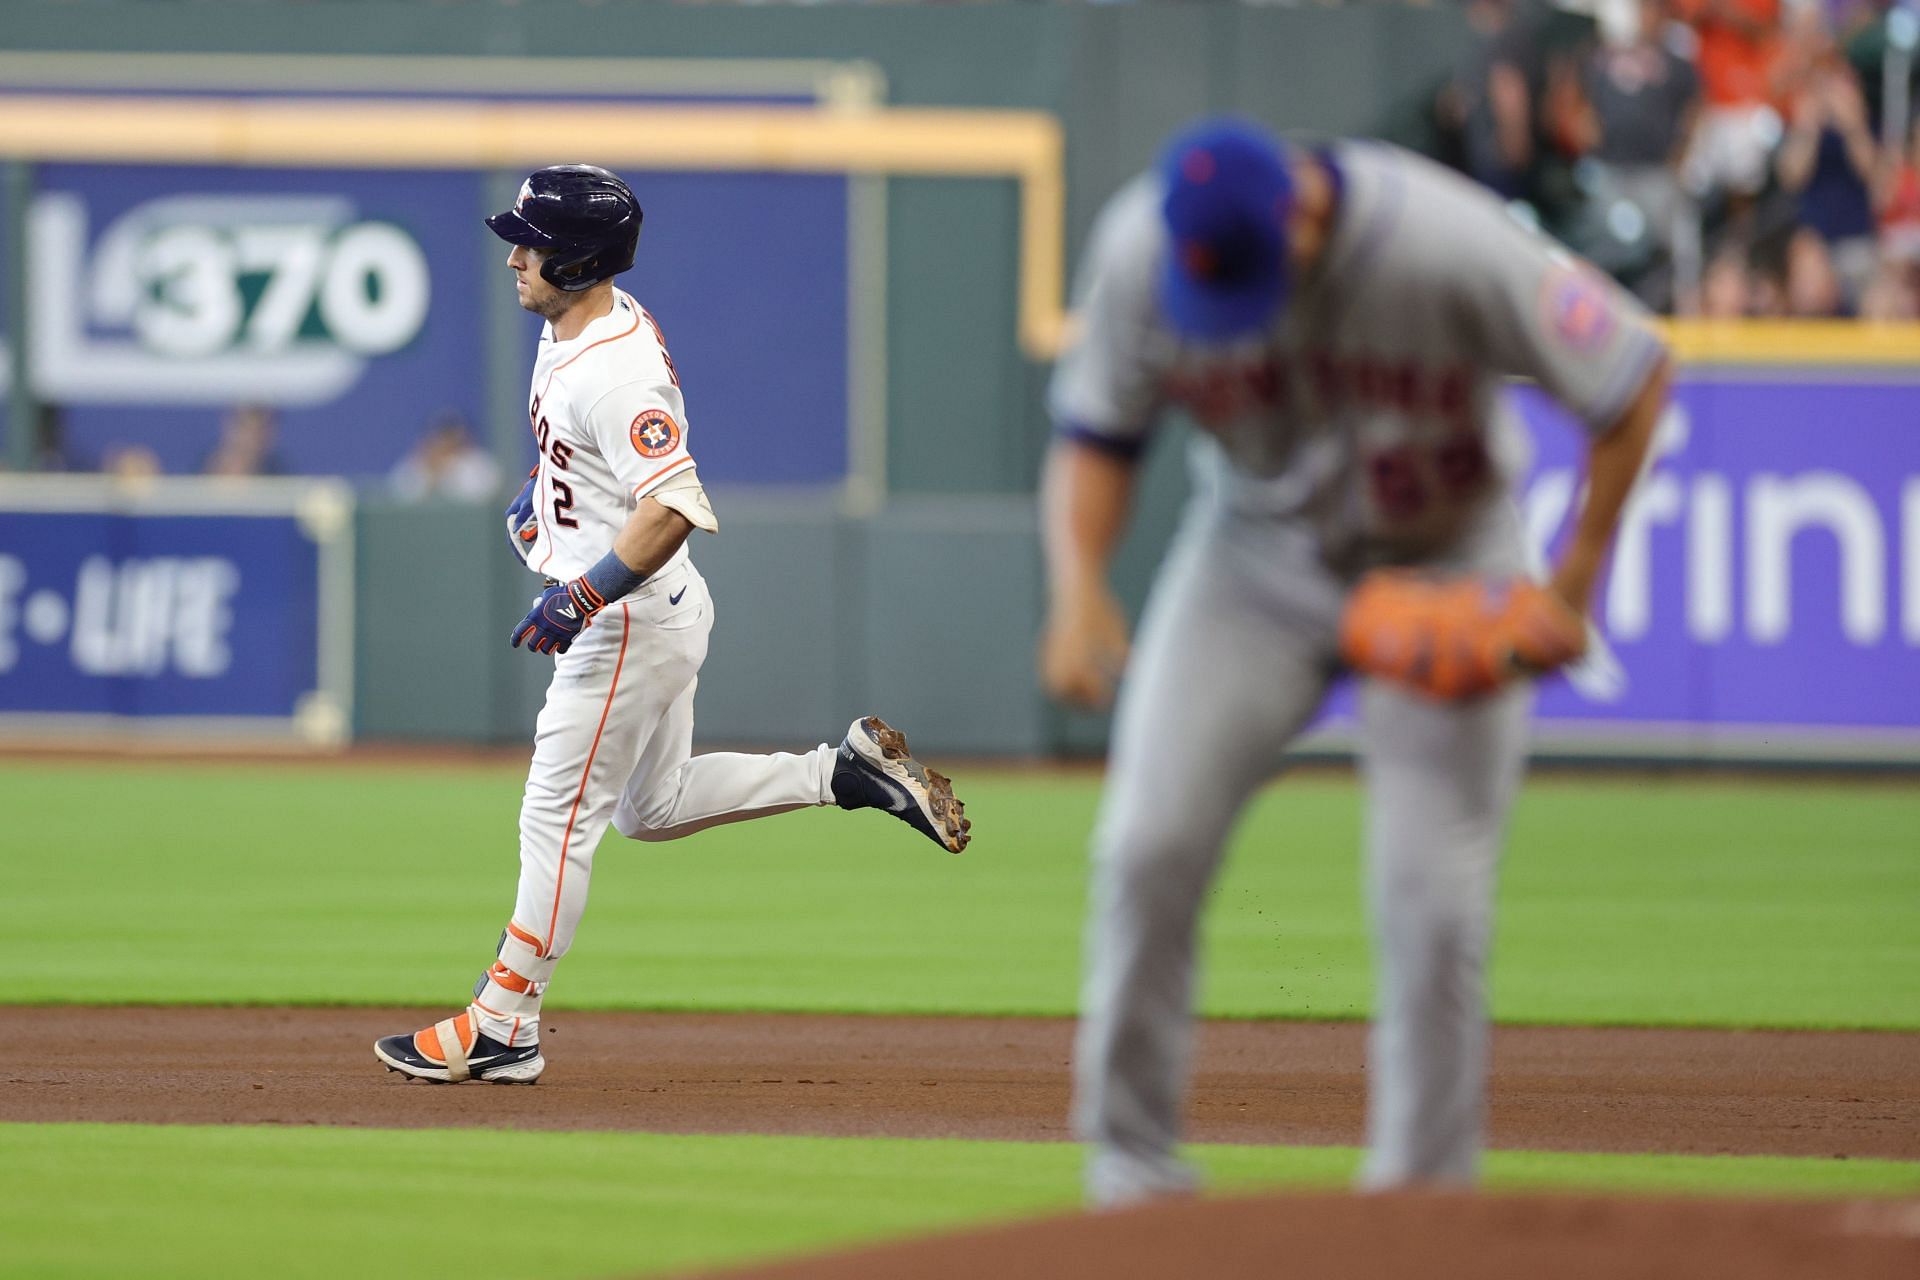 Alex Bregman rounding the bases after a two run homer